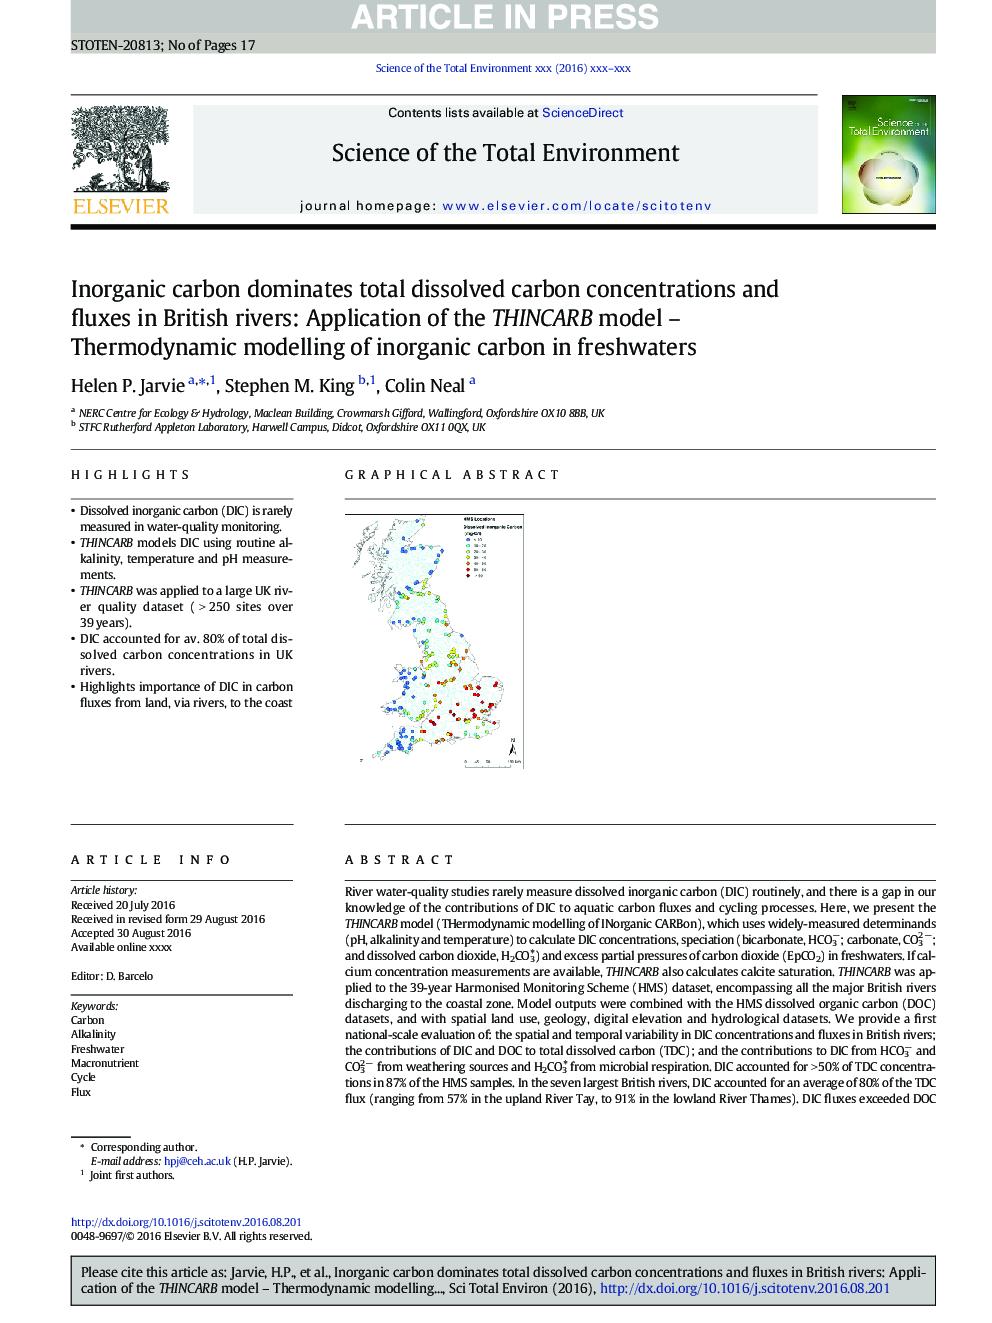 Inorganic carbon dominates total dissolved carbon concentrations and fluxes in British rivers: Application of the THINCARB model - Thermodynamic modelling of inorganic carbon in freshwaters